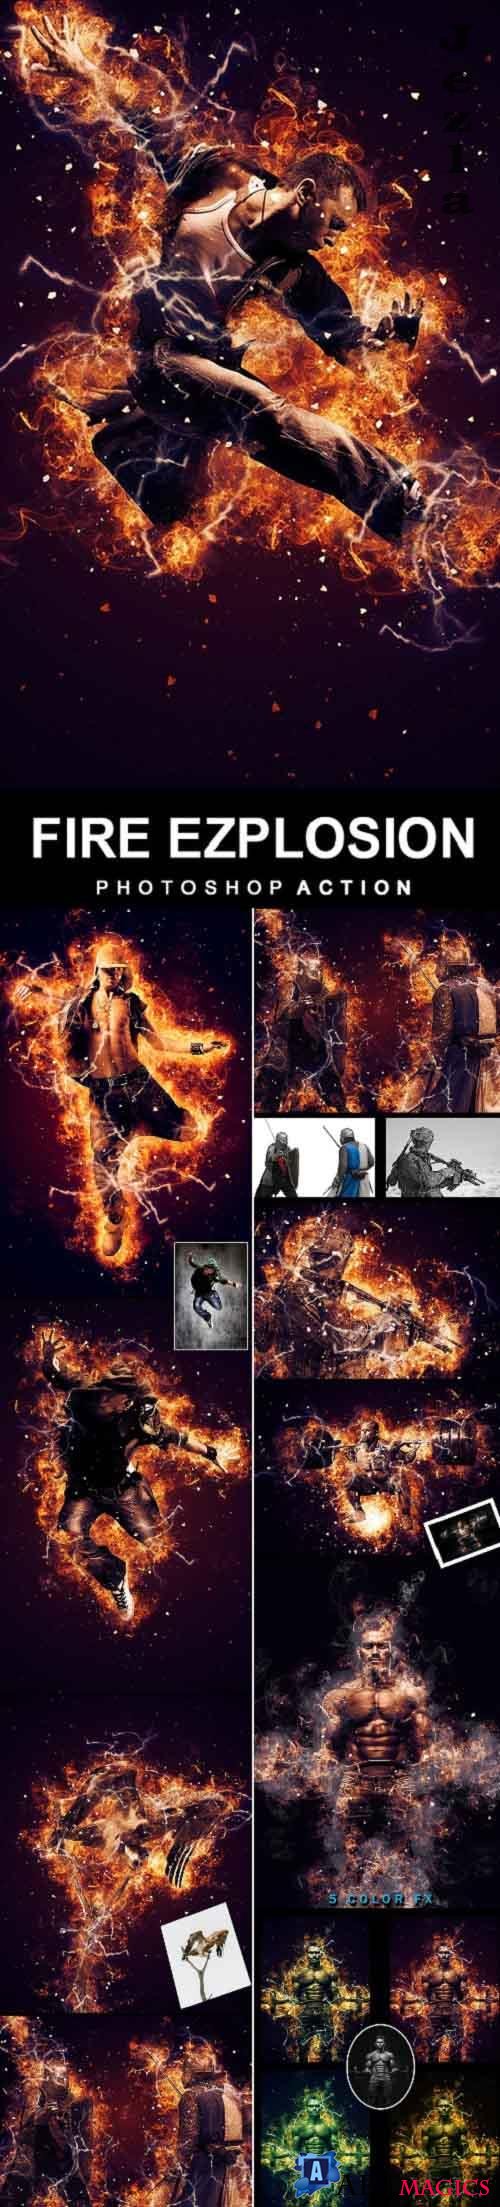 Fire Explosion Photoshop Action 27119145